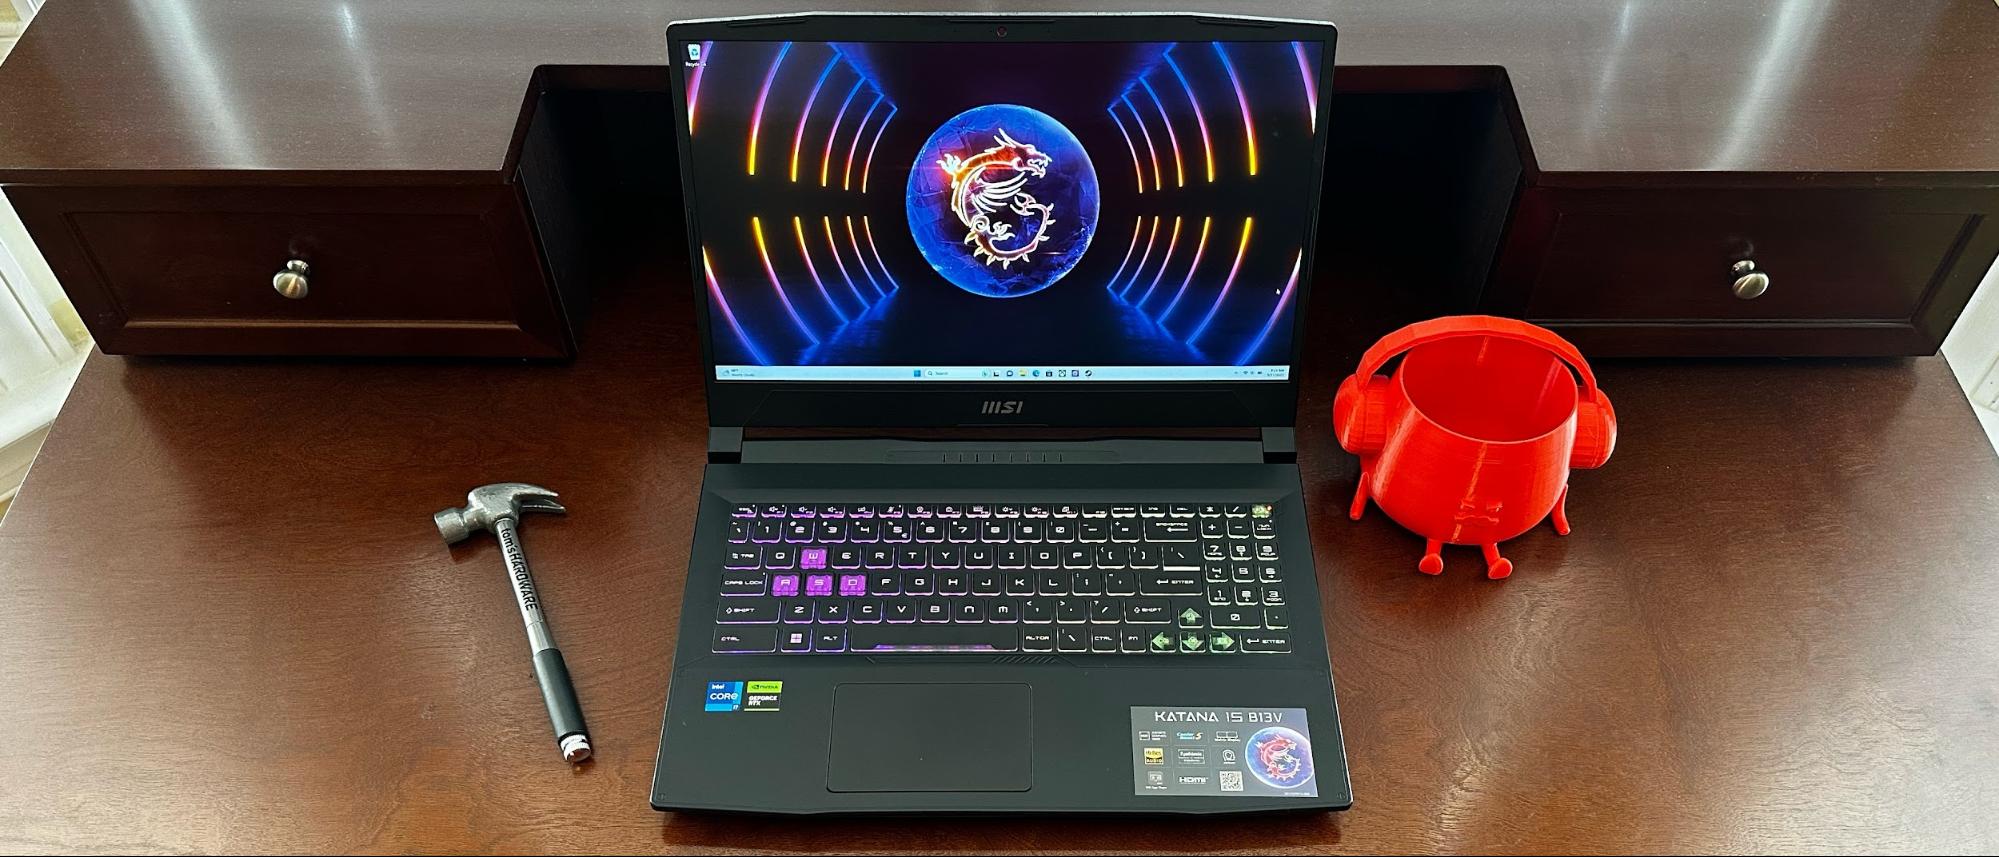 MSI Katana 15  The Best Budget Gaming Laptop with RTX 4070 + i7-13620H 